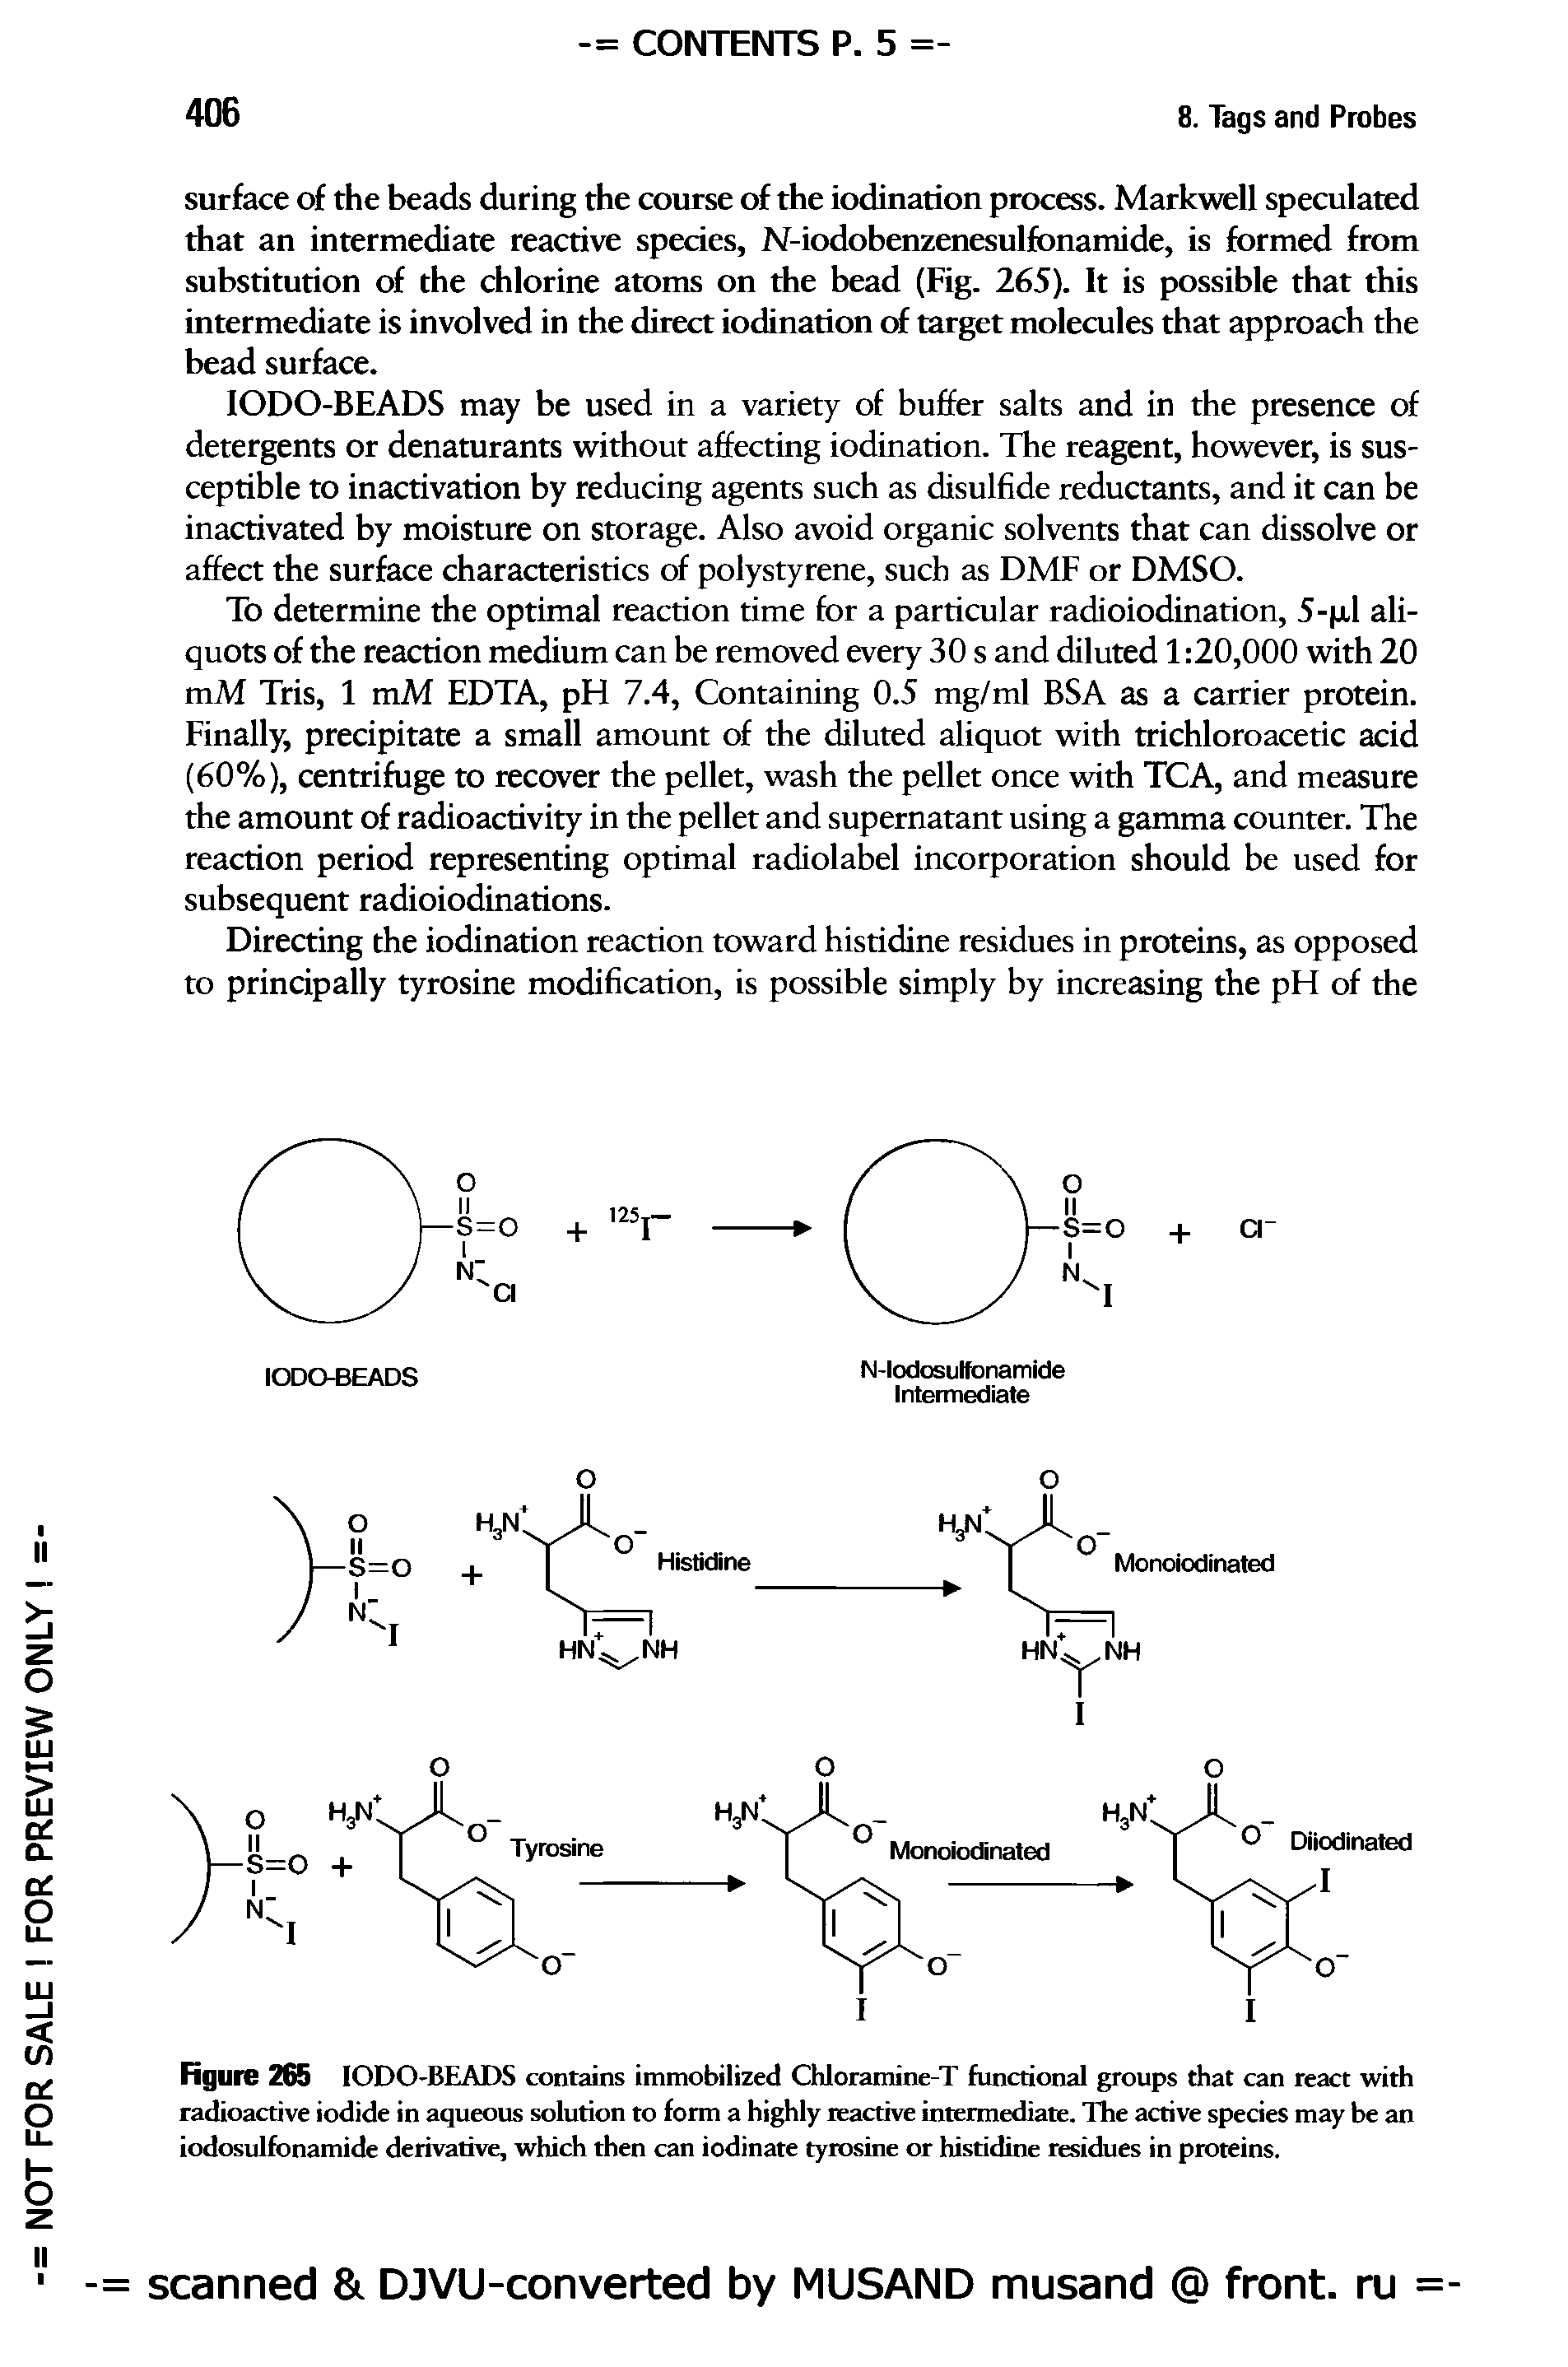 Figure 265 IODO-BEADS contains immobilized Chloramine-T functional groups that can react with radioactive iodide in aqueous solution to form a highly reactive intermediate. The active species may be an iodosulfonamide derivative, which then can iodinate tyrosine or histidine residues in proteins.